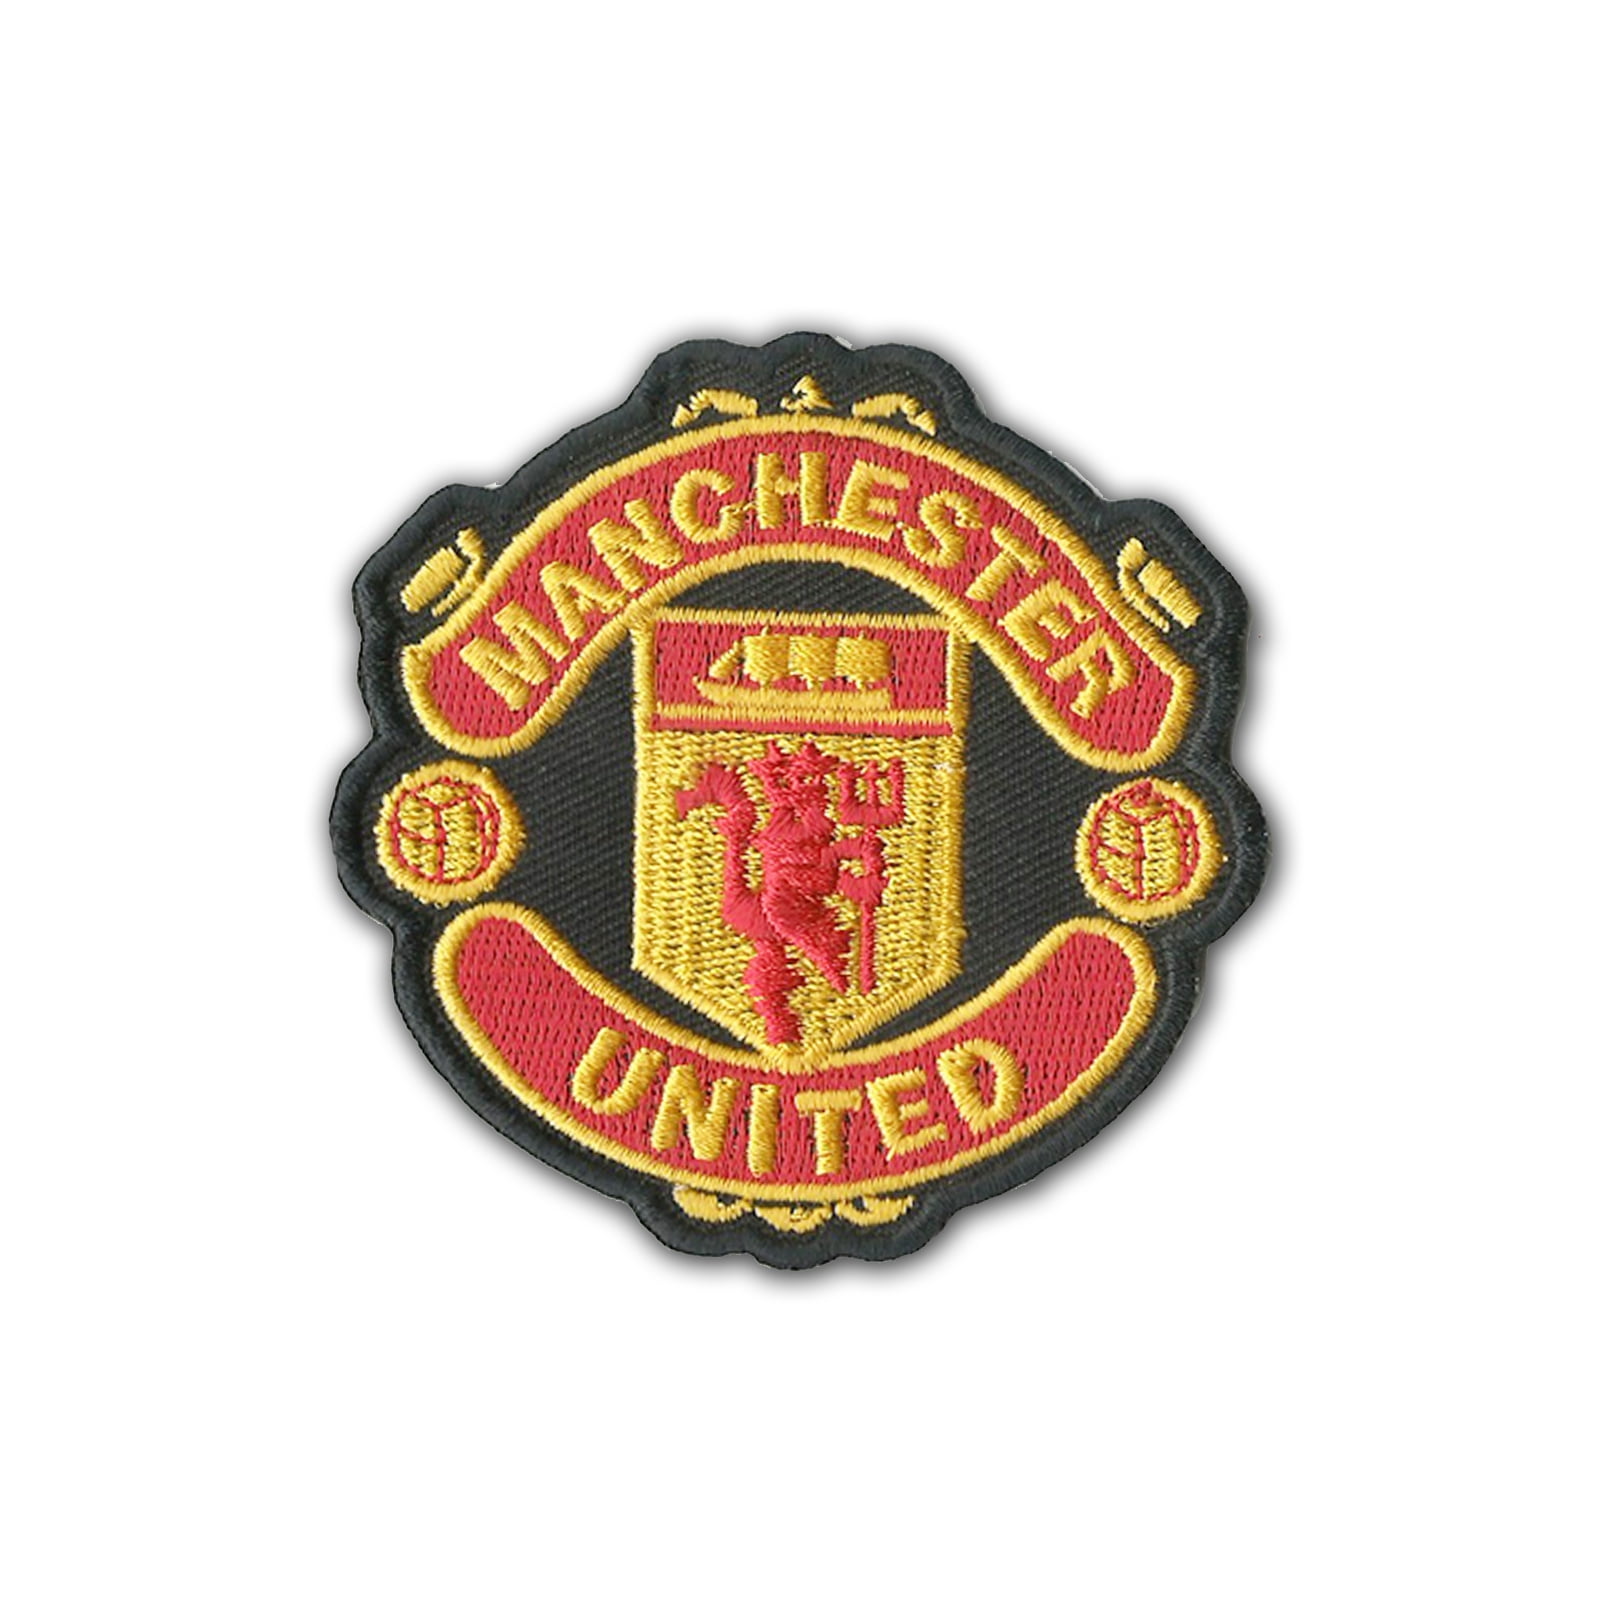 Vintage Manchester United Crest Old Trafford Football Soccer Shirt Jersey Embroidered Iron Sew On Patch Badge 